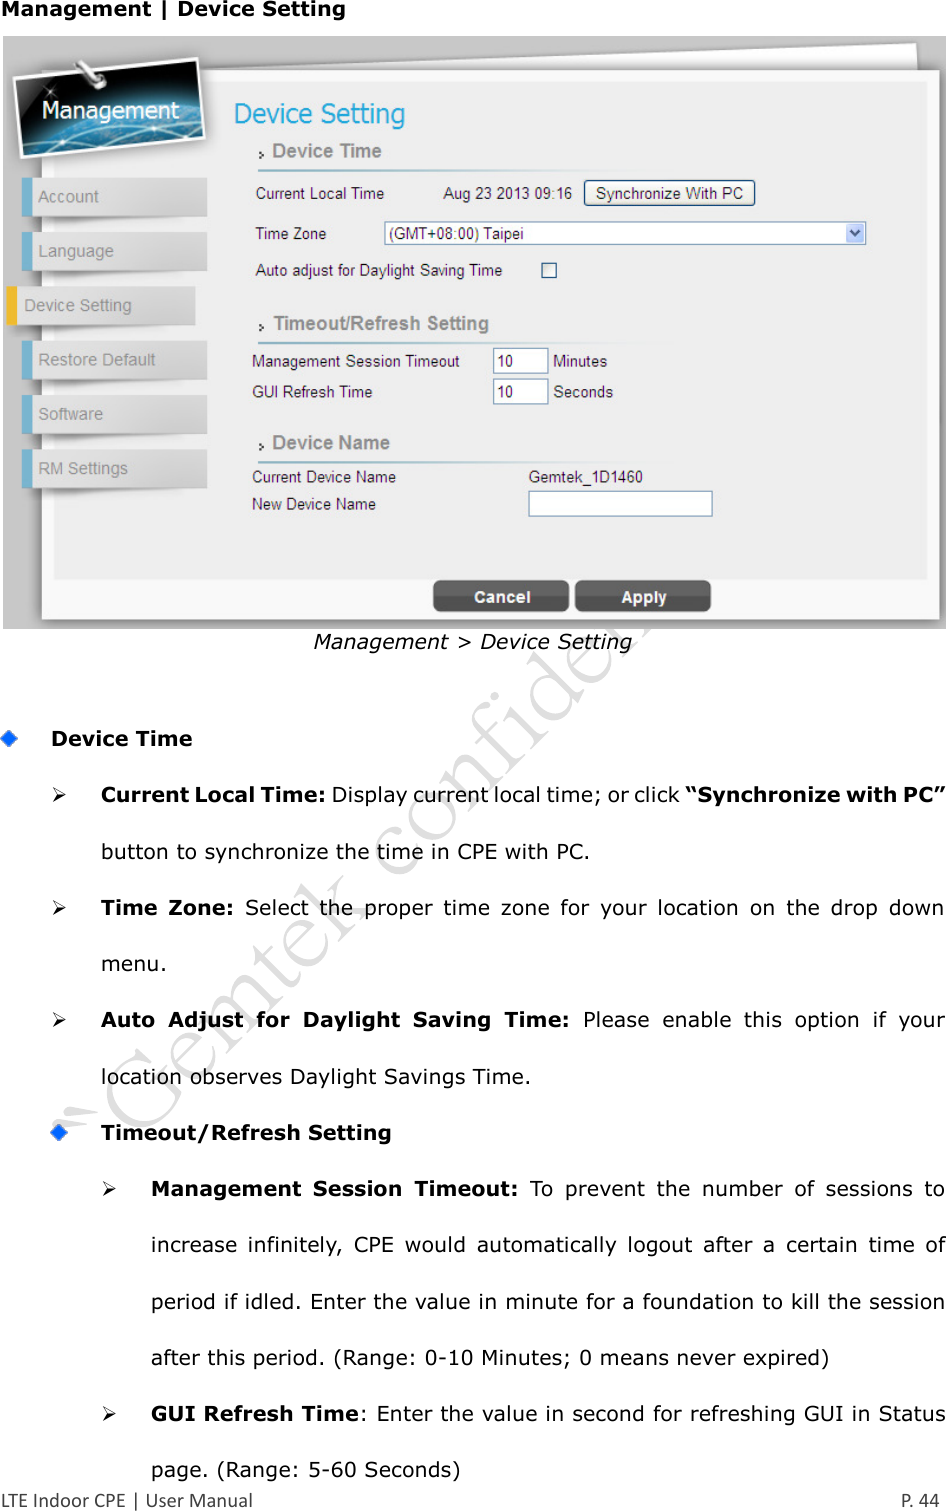  LTE Indoor CPE | User Manual      P. 44 Management | Device Setting  Management &gt; Device Setting   Device Time  Current Local Time: Display current local time; or click “Synchronize with PC” button to synchronize the time in CPE with PC.  Time  Zone:  Select  the  proper  time  zone  for  your  location  on  the  drop  down menu.  Auto  Adjust  for  Daylight  Saving  Time:  Please  enable  this  option  if  your location observes Daylight Savings Time.  Timeout/Refresh Setting  Management  Session  Timeout:  To  prevent  the  number  of  sessions  to increase  infinitely,  CPE  would  automatically  logout  after  a  certain  time  of period if idled. Enter the value in minute for a foundation to kill the session after this period. (Range: 0-10 Minutes; 0 means never expired)  GUI Refresh Time: Enter the value in second for refreshing GUI in Status page. (Range: 5-60 Seconds) 